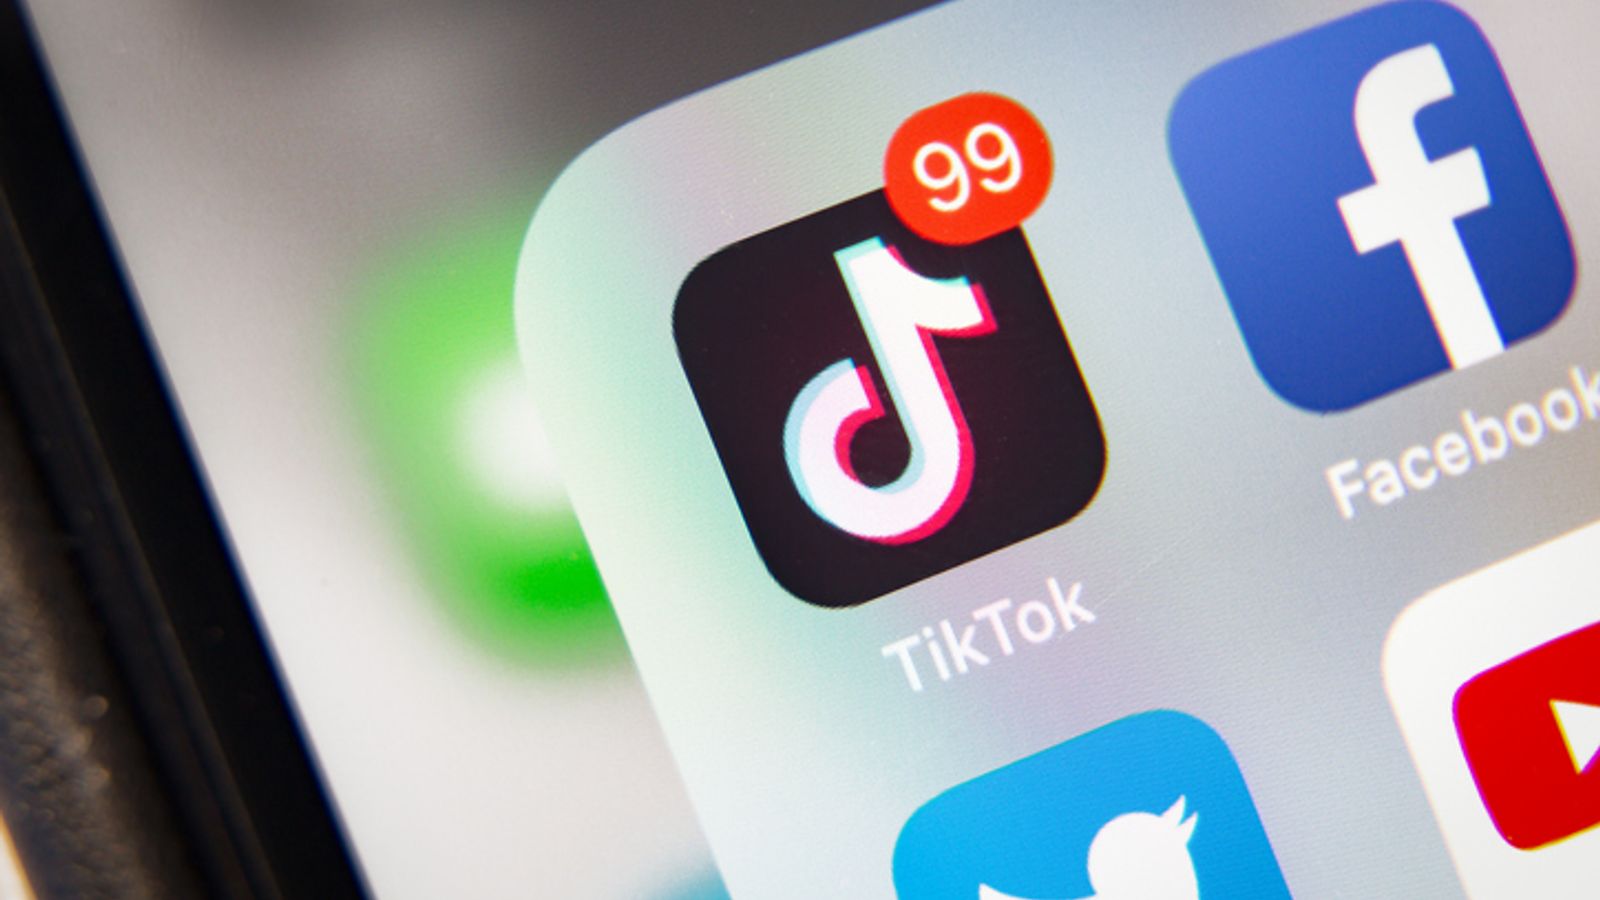 TikTok trend featuring tiny magnets could be life-threatening – and NHS wants them banned